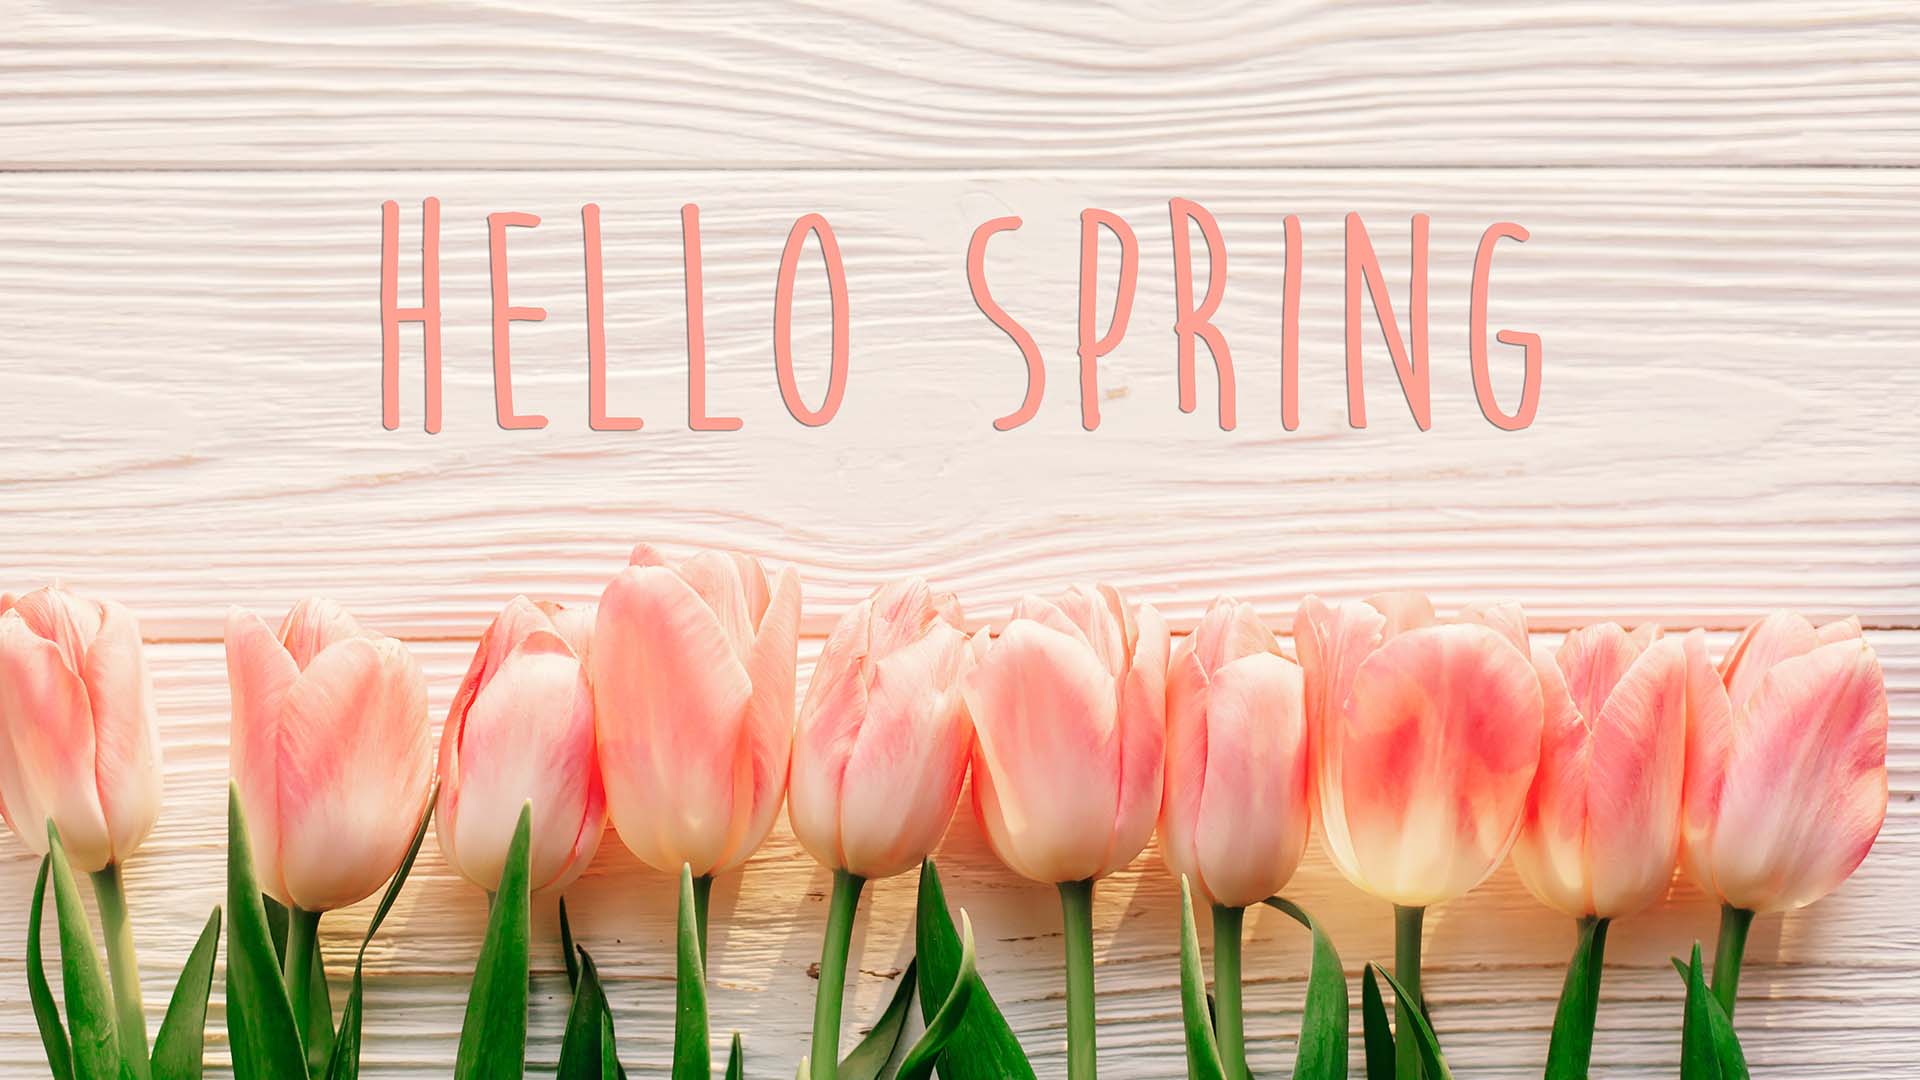 10 Light Pink tulips laying across a cream colored wooden deck. Hello Spring" is spelt out above the tulips in a salmon colored font